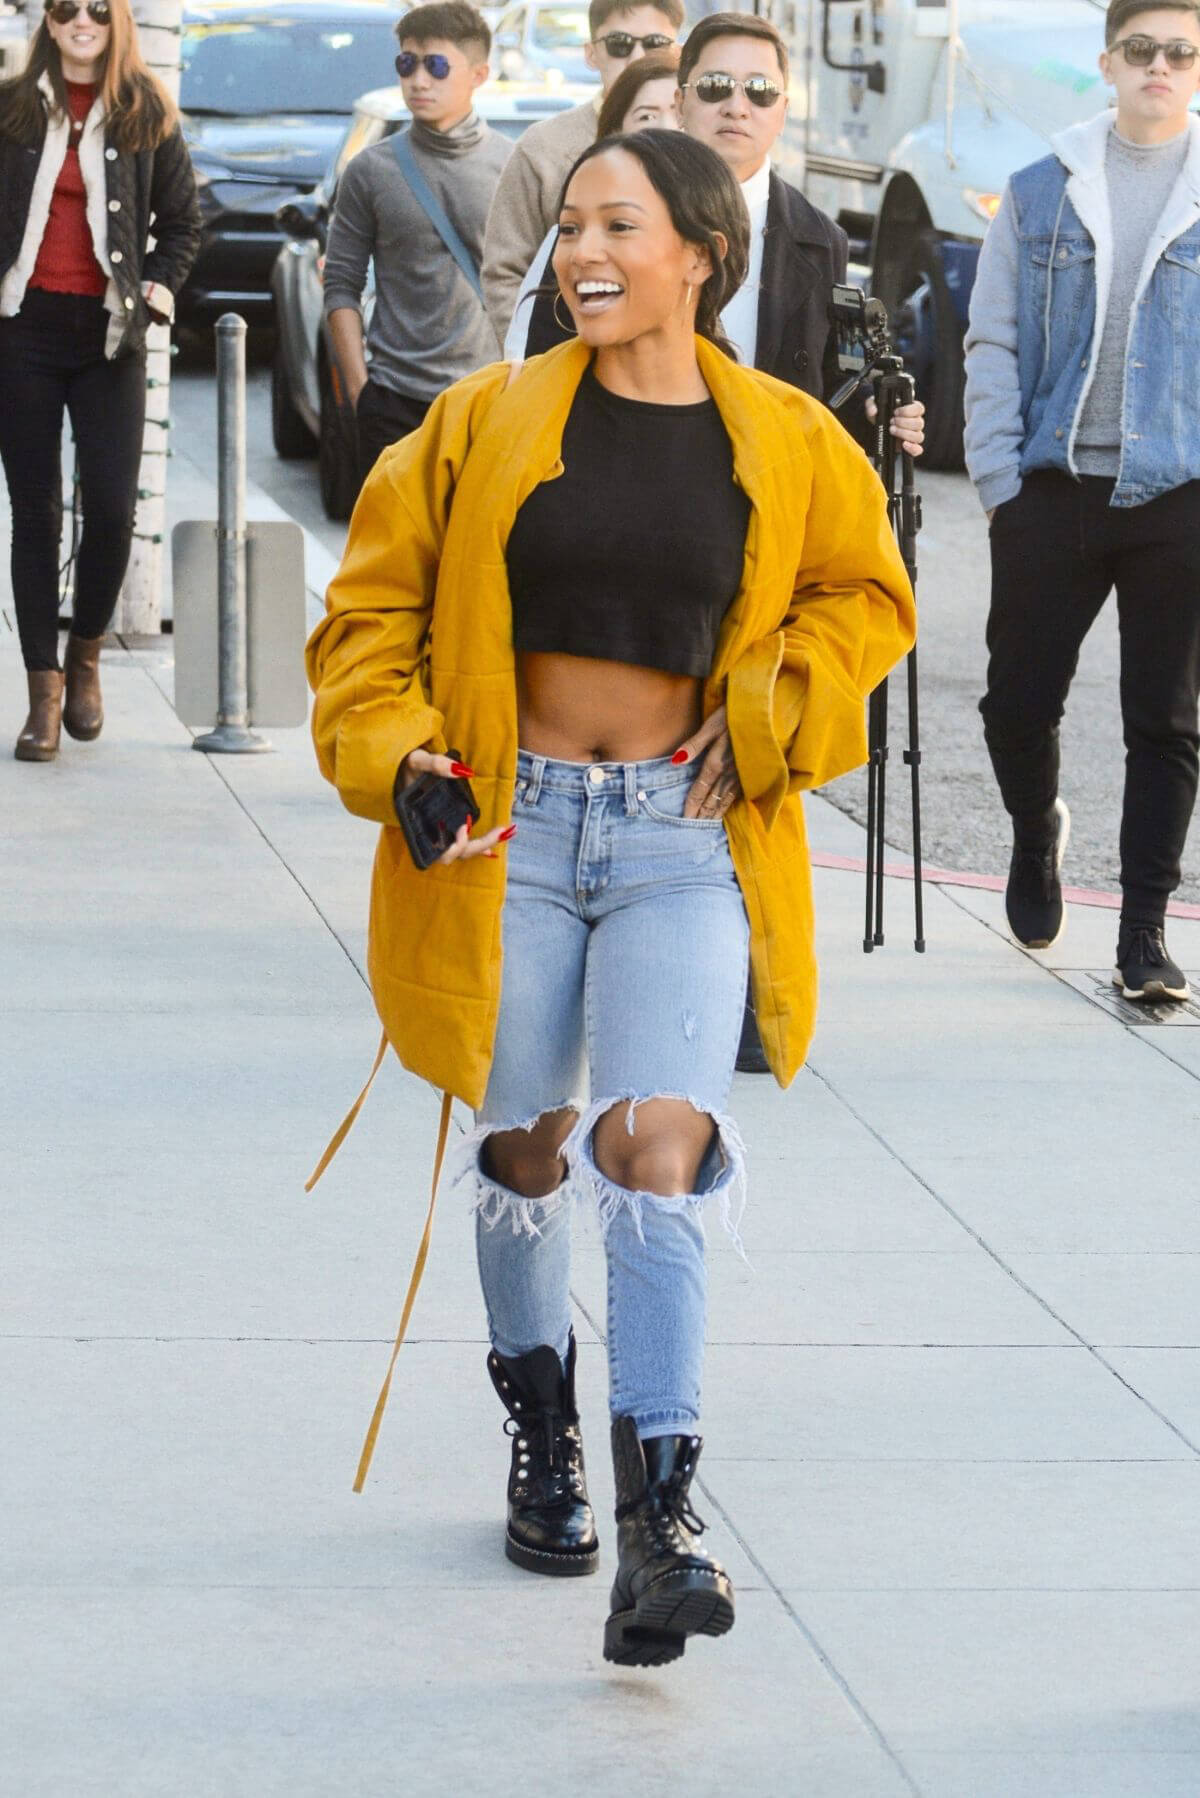 Karrueche Tran in Ripped Jeans Out Shopping in Beverly Hills 2018/12/28